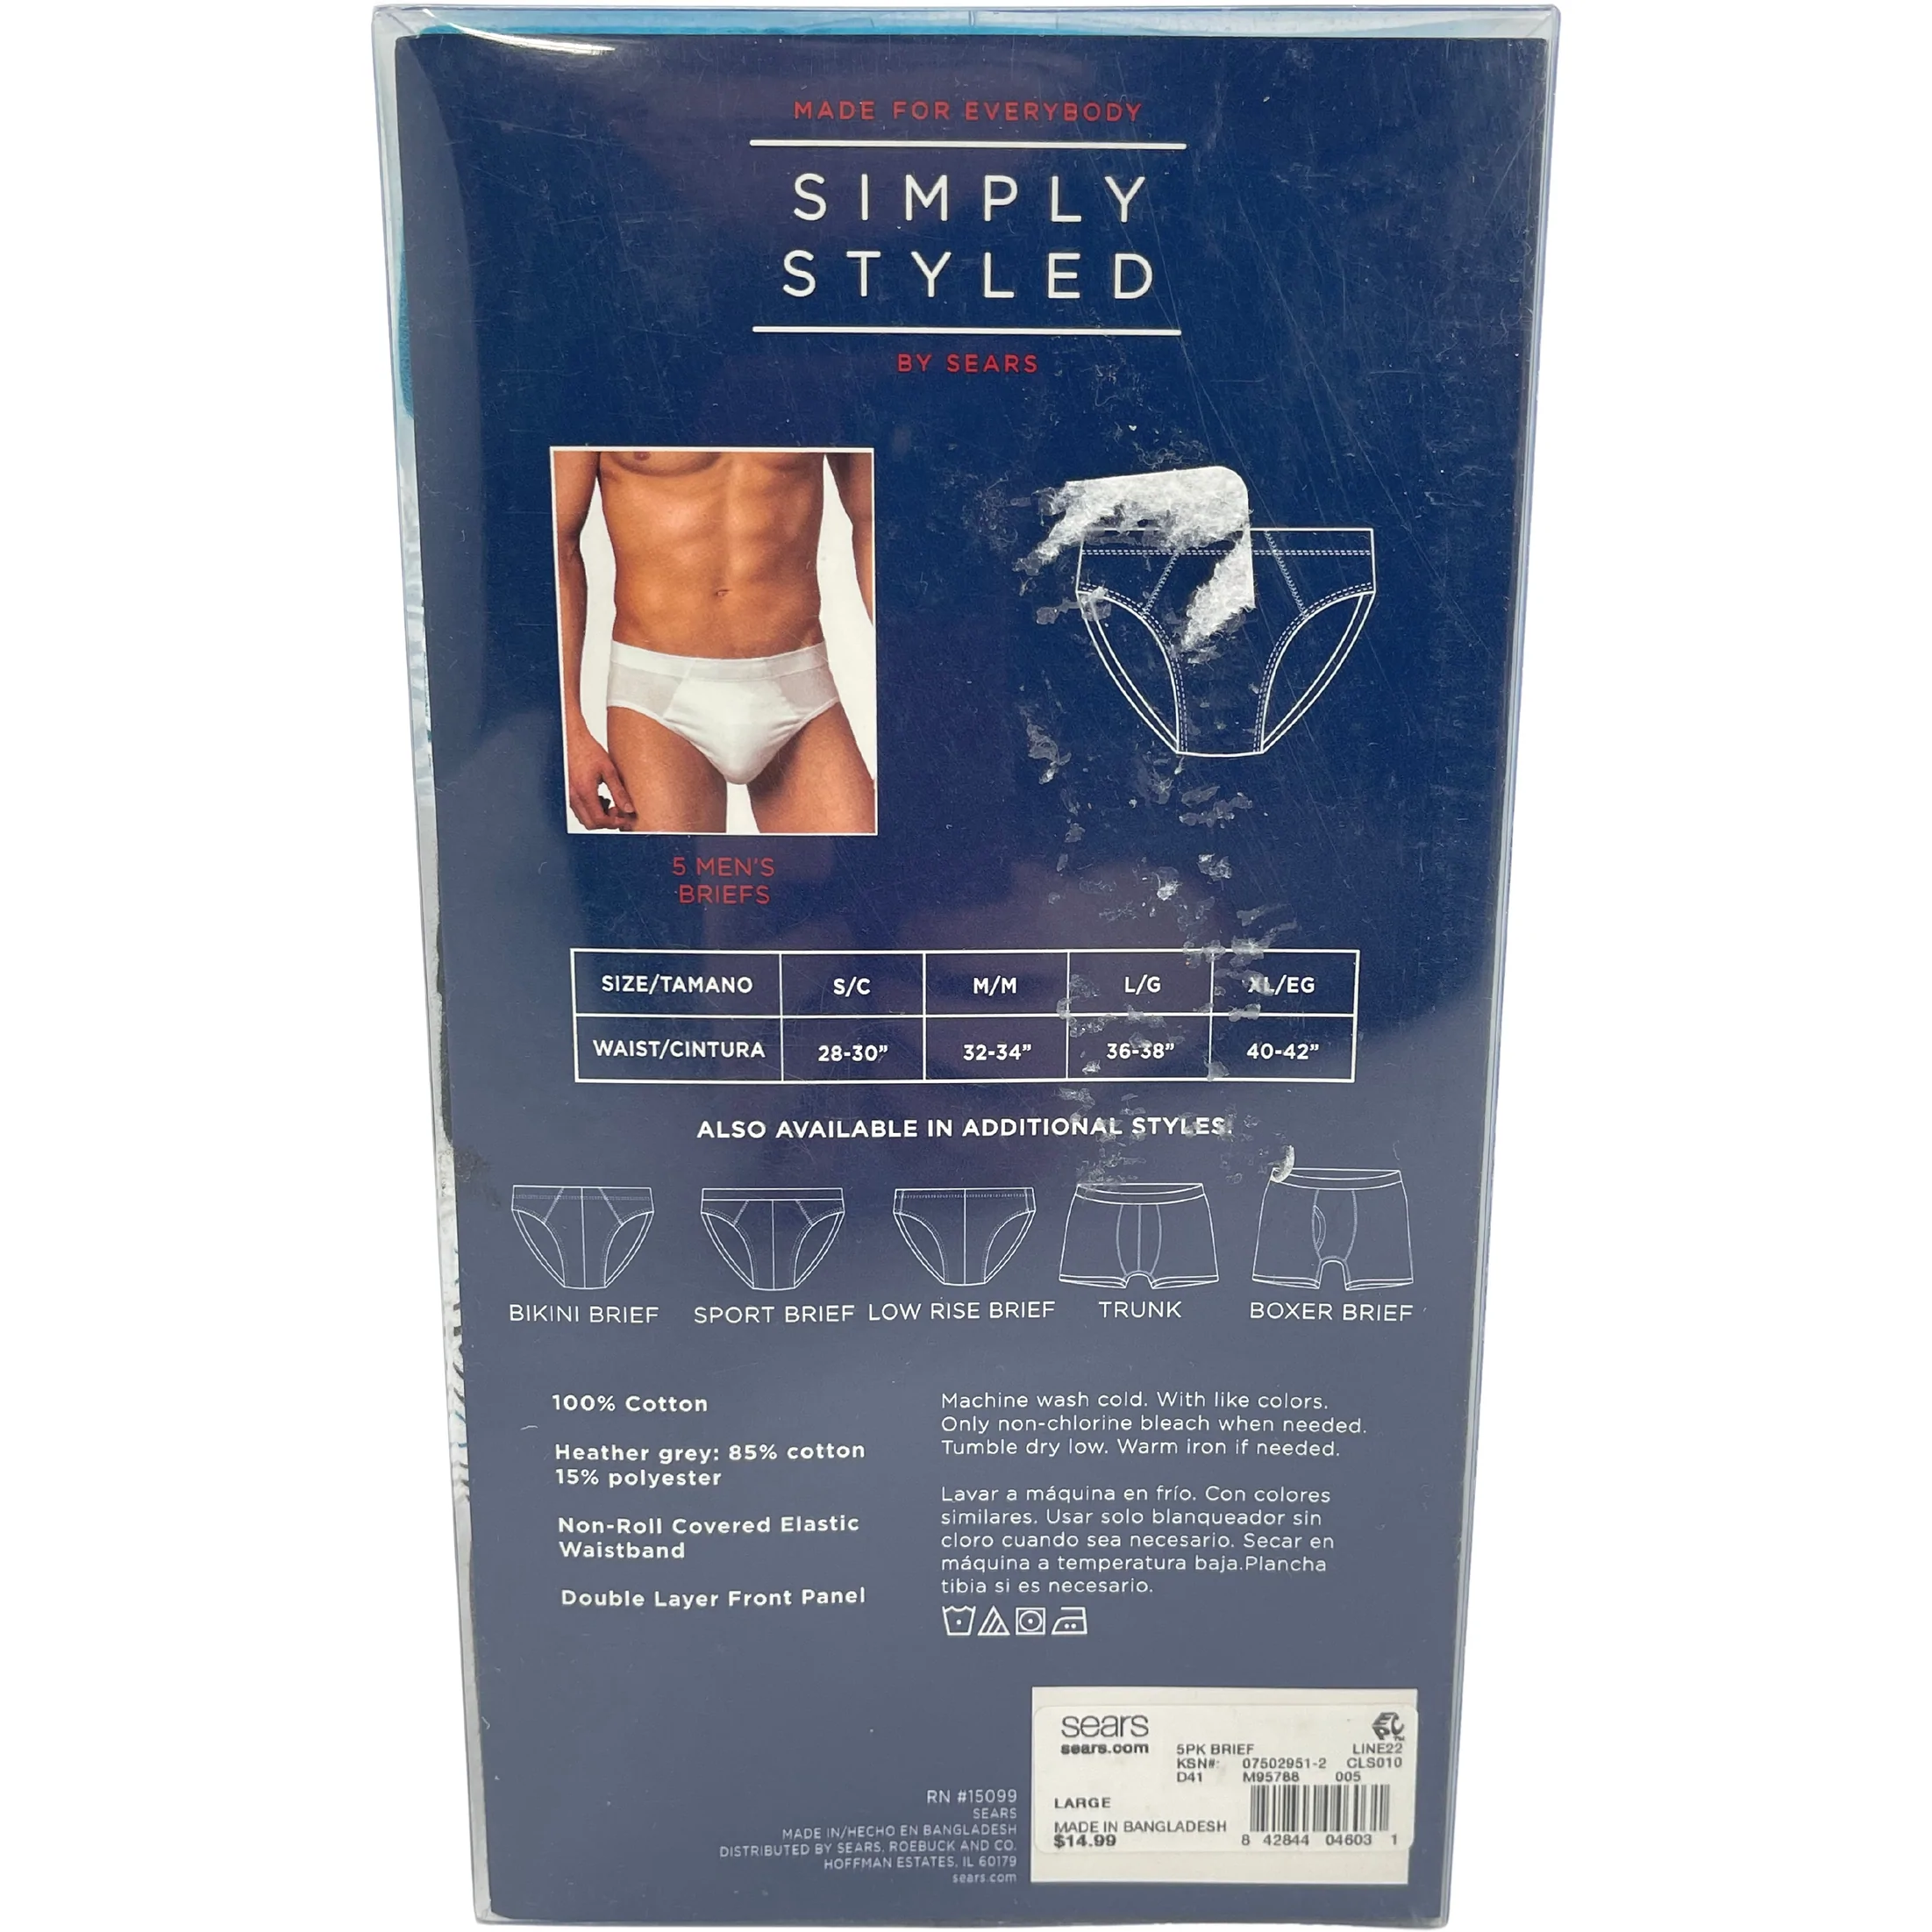 Simply Styled Men's Briefs / 5 Pack / Blue, White & Black / Size Large